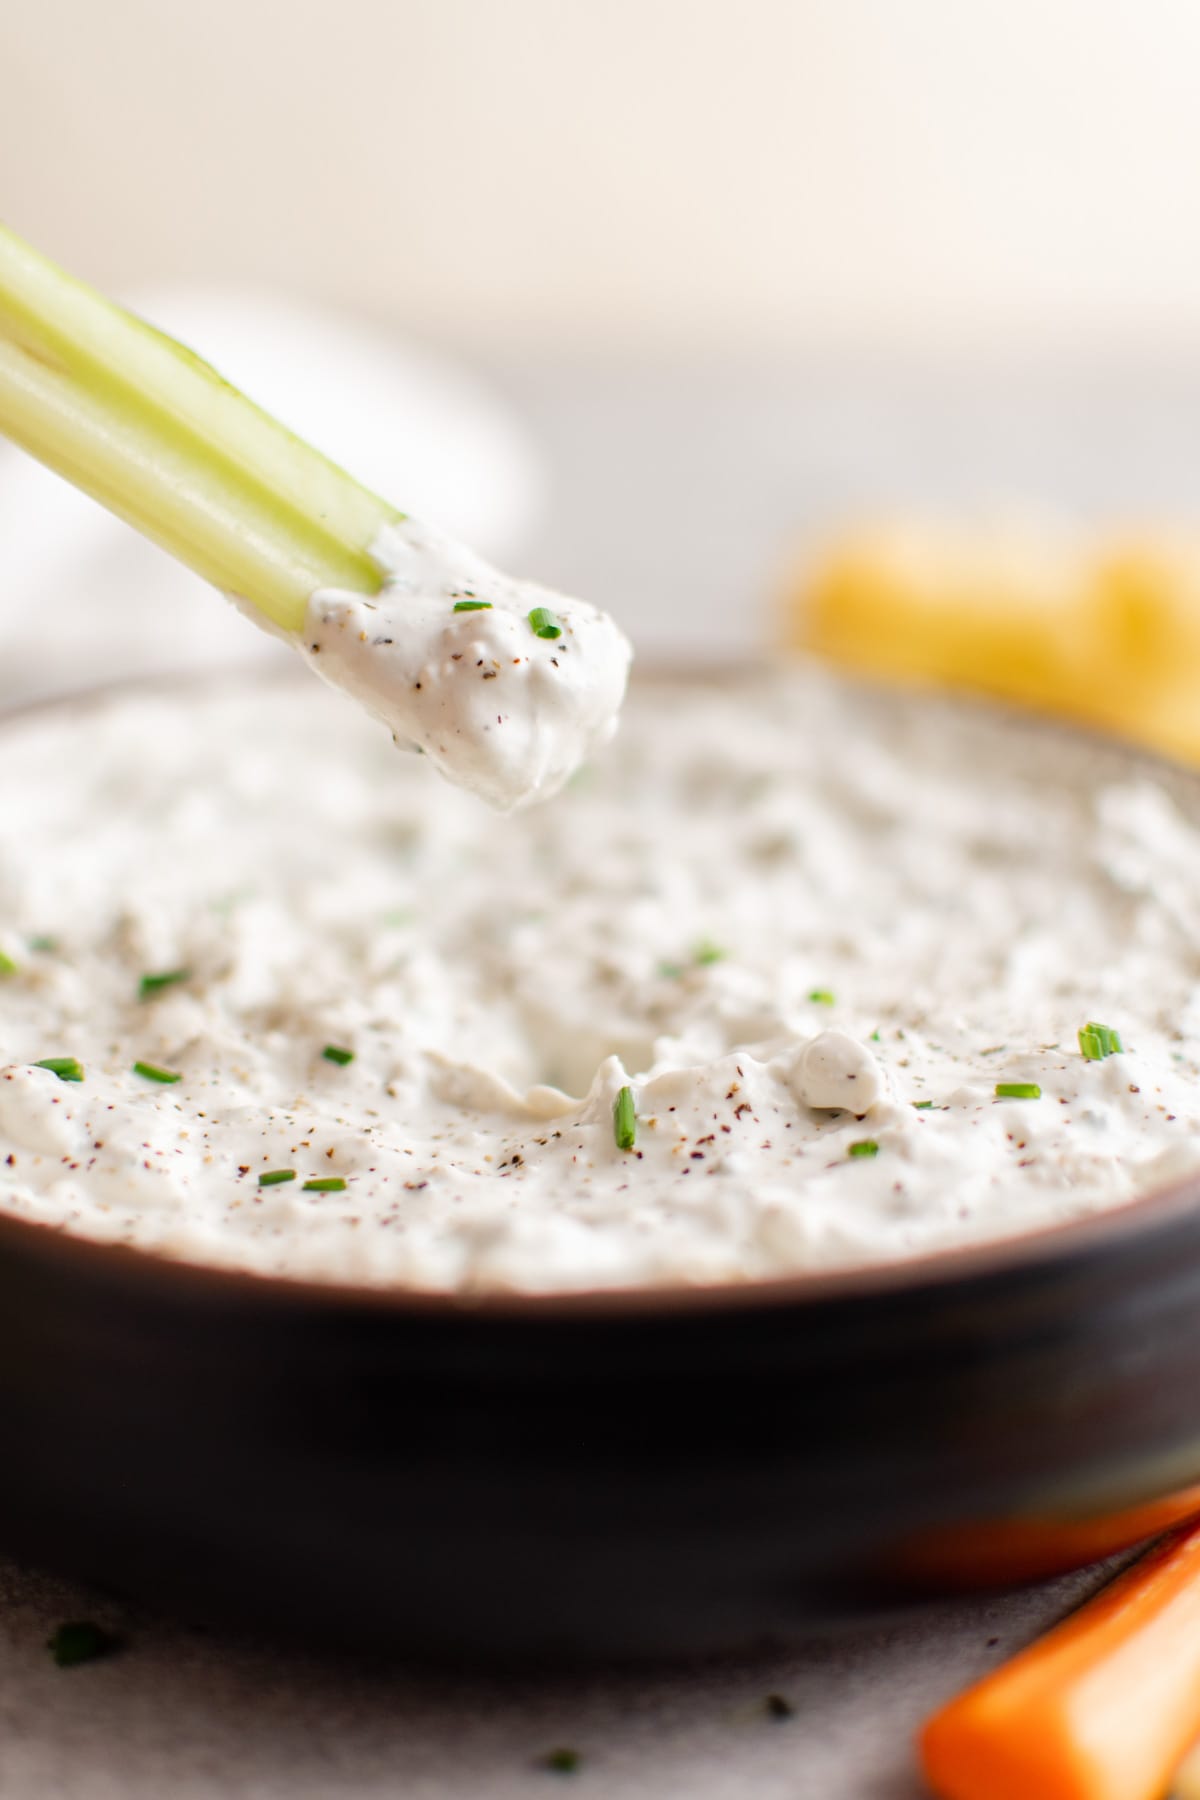 celery stick with blue cheese dip